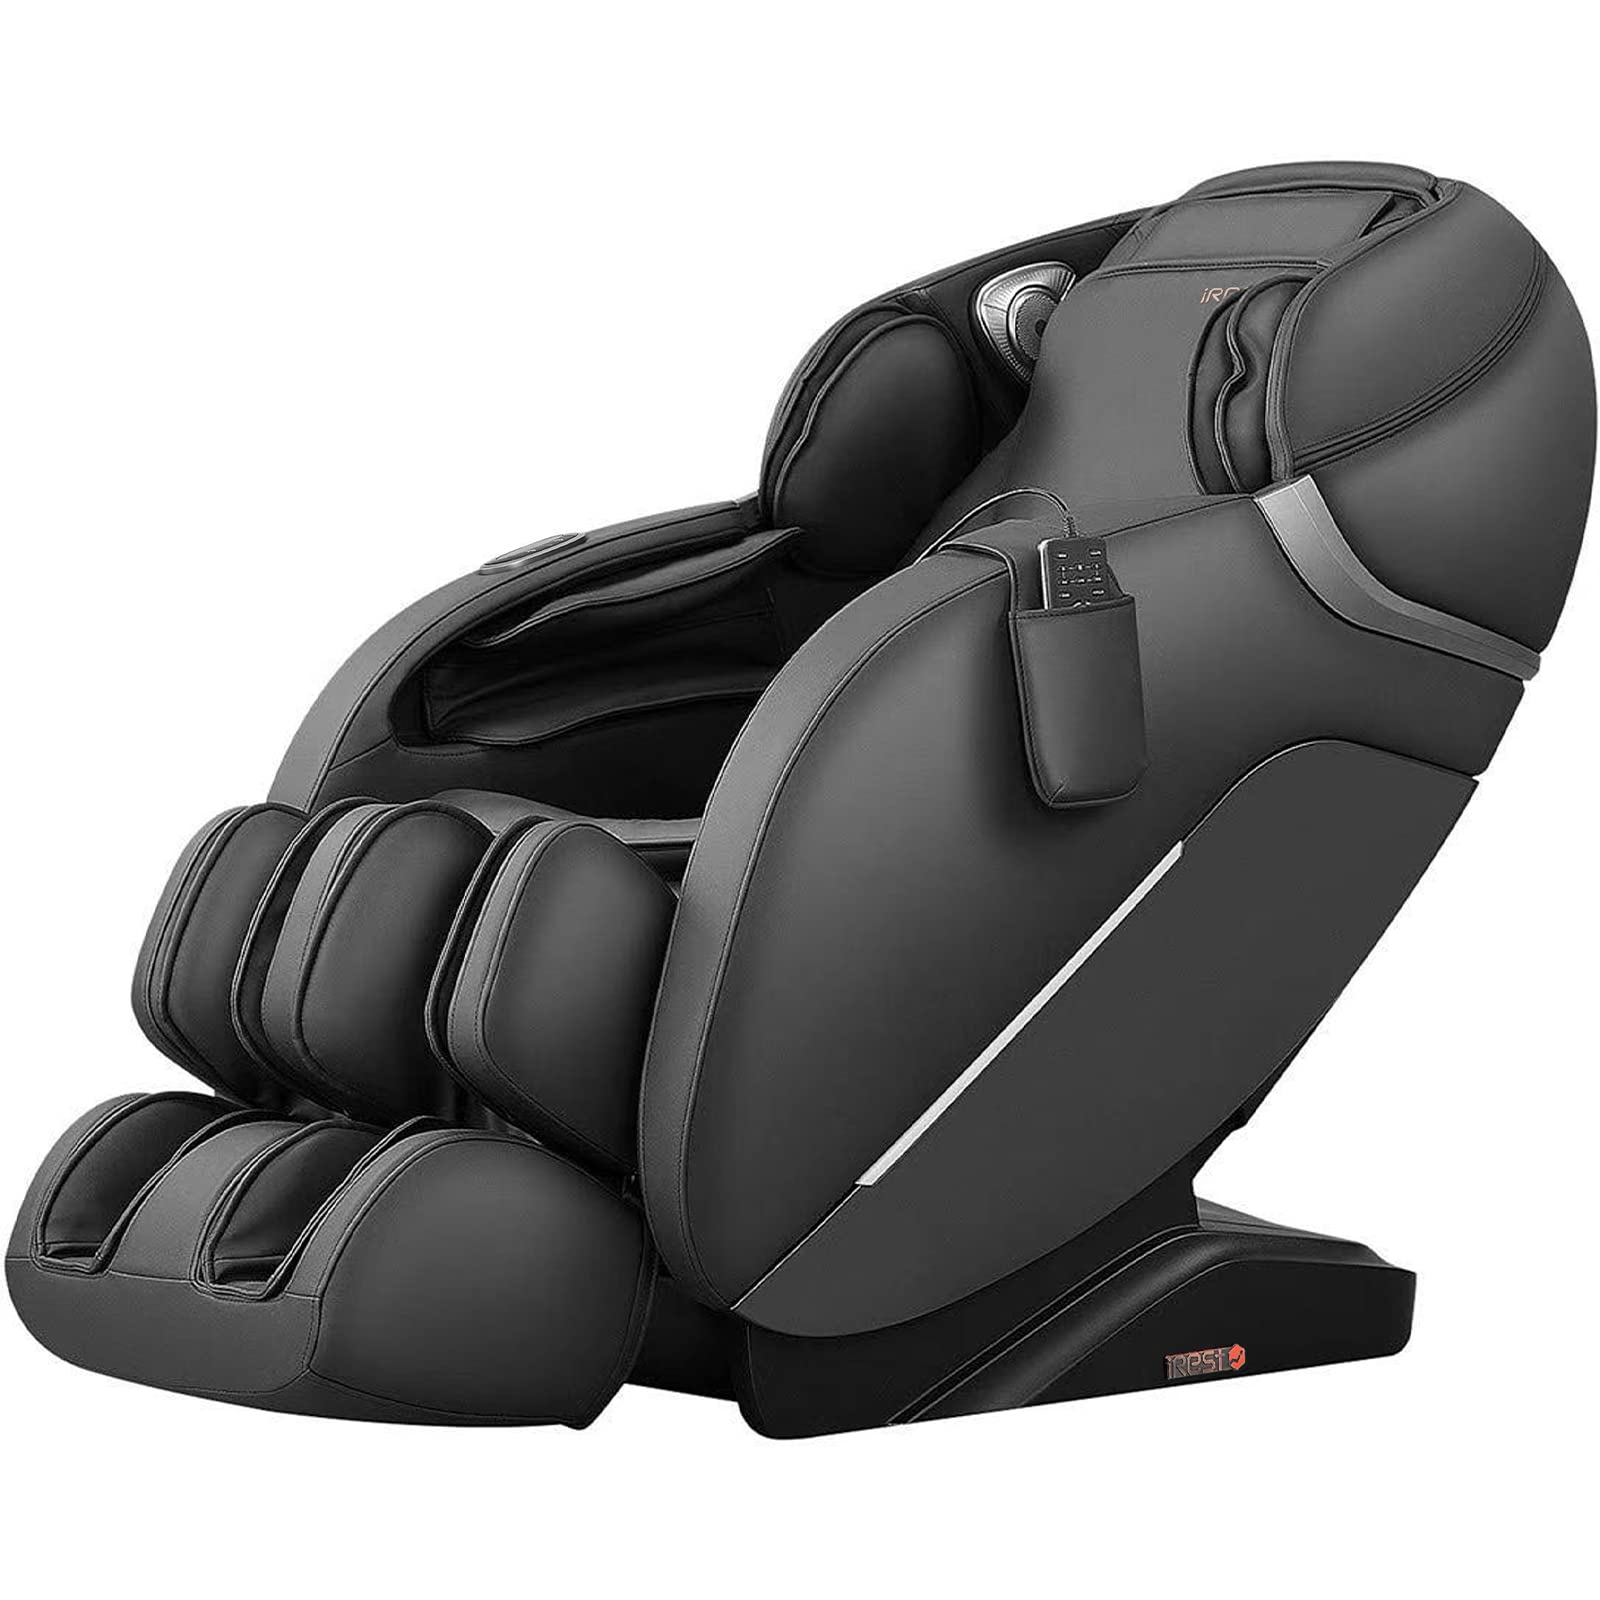 Irest Sl Track Massage Chair Recliner, Full Body Massage Chair With Zero Gravity, Bluetooth Speaker, Airbags, Heating, And Foot